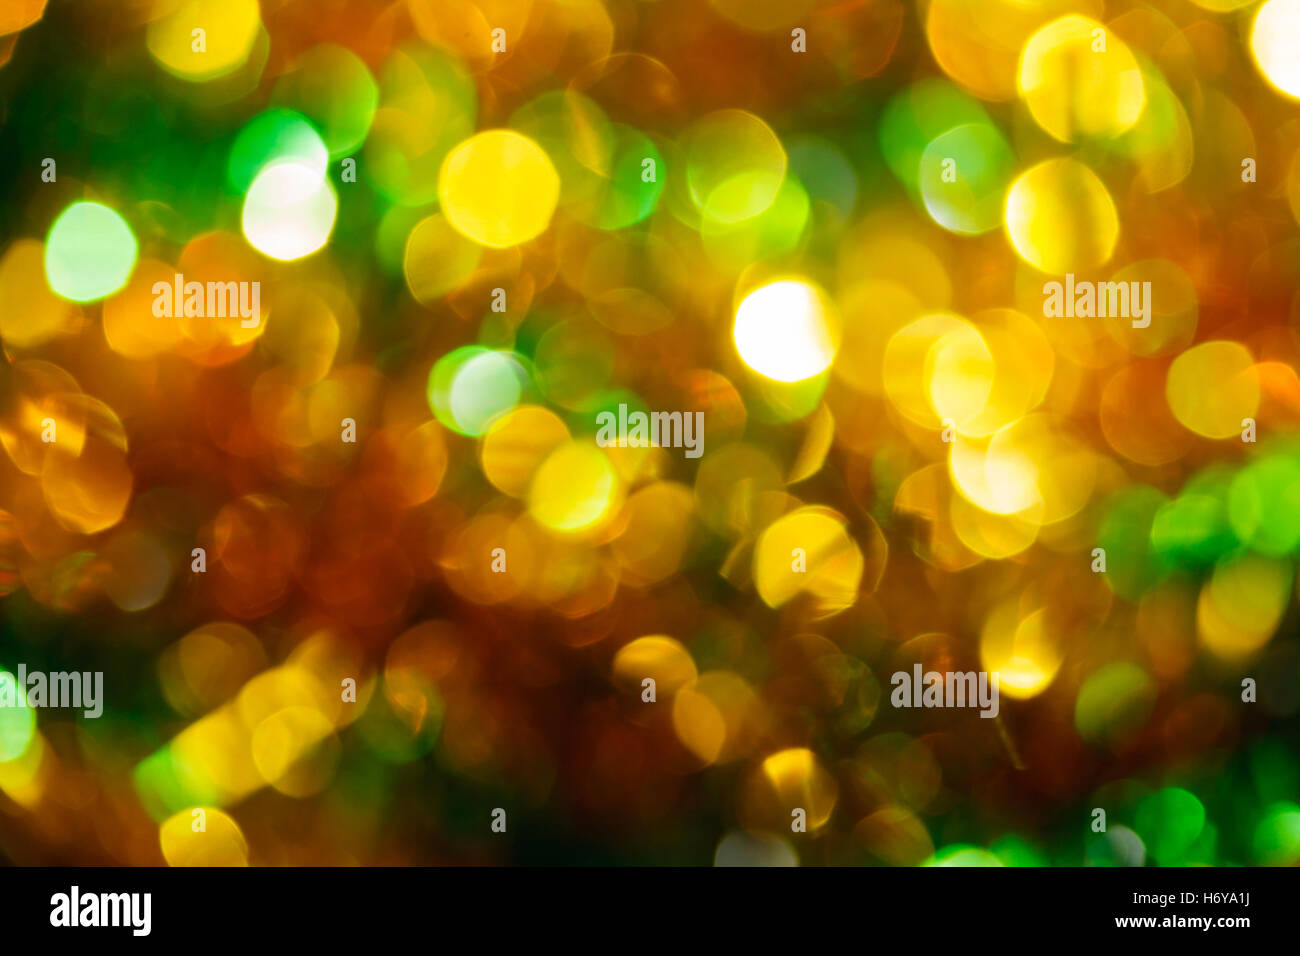 Sparkles abstract background Stock Photo